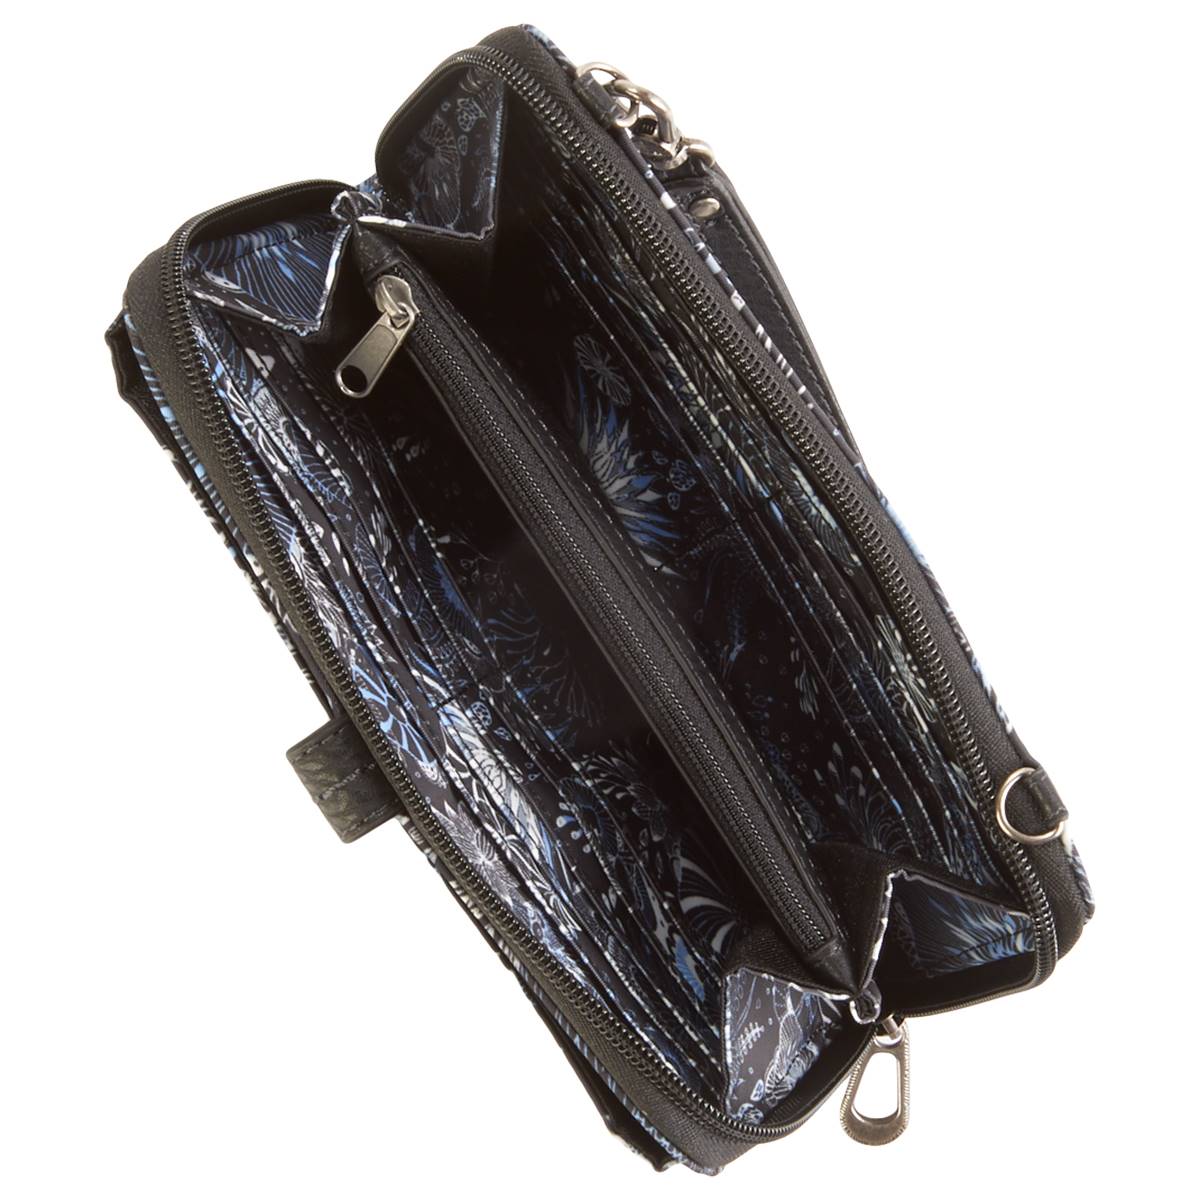 Sakroots Ecowill Smartphone Crossbody - Midnight Seascape